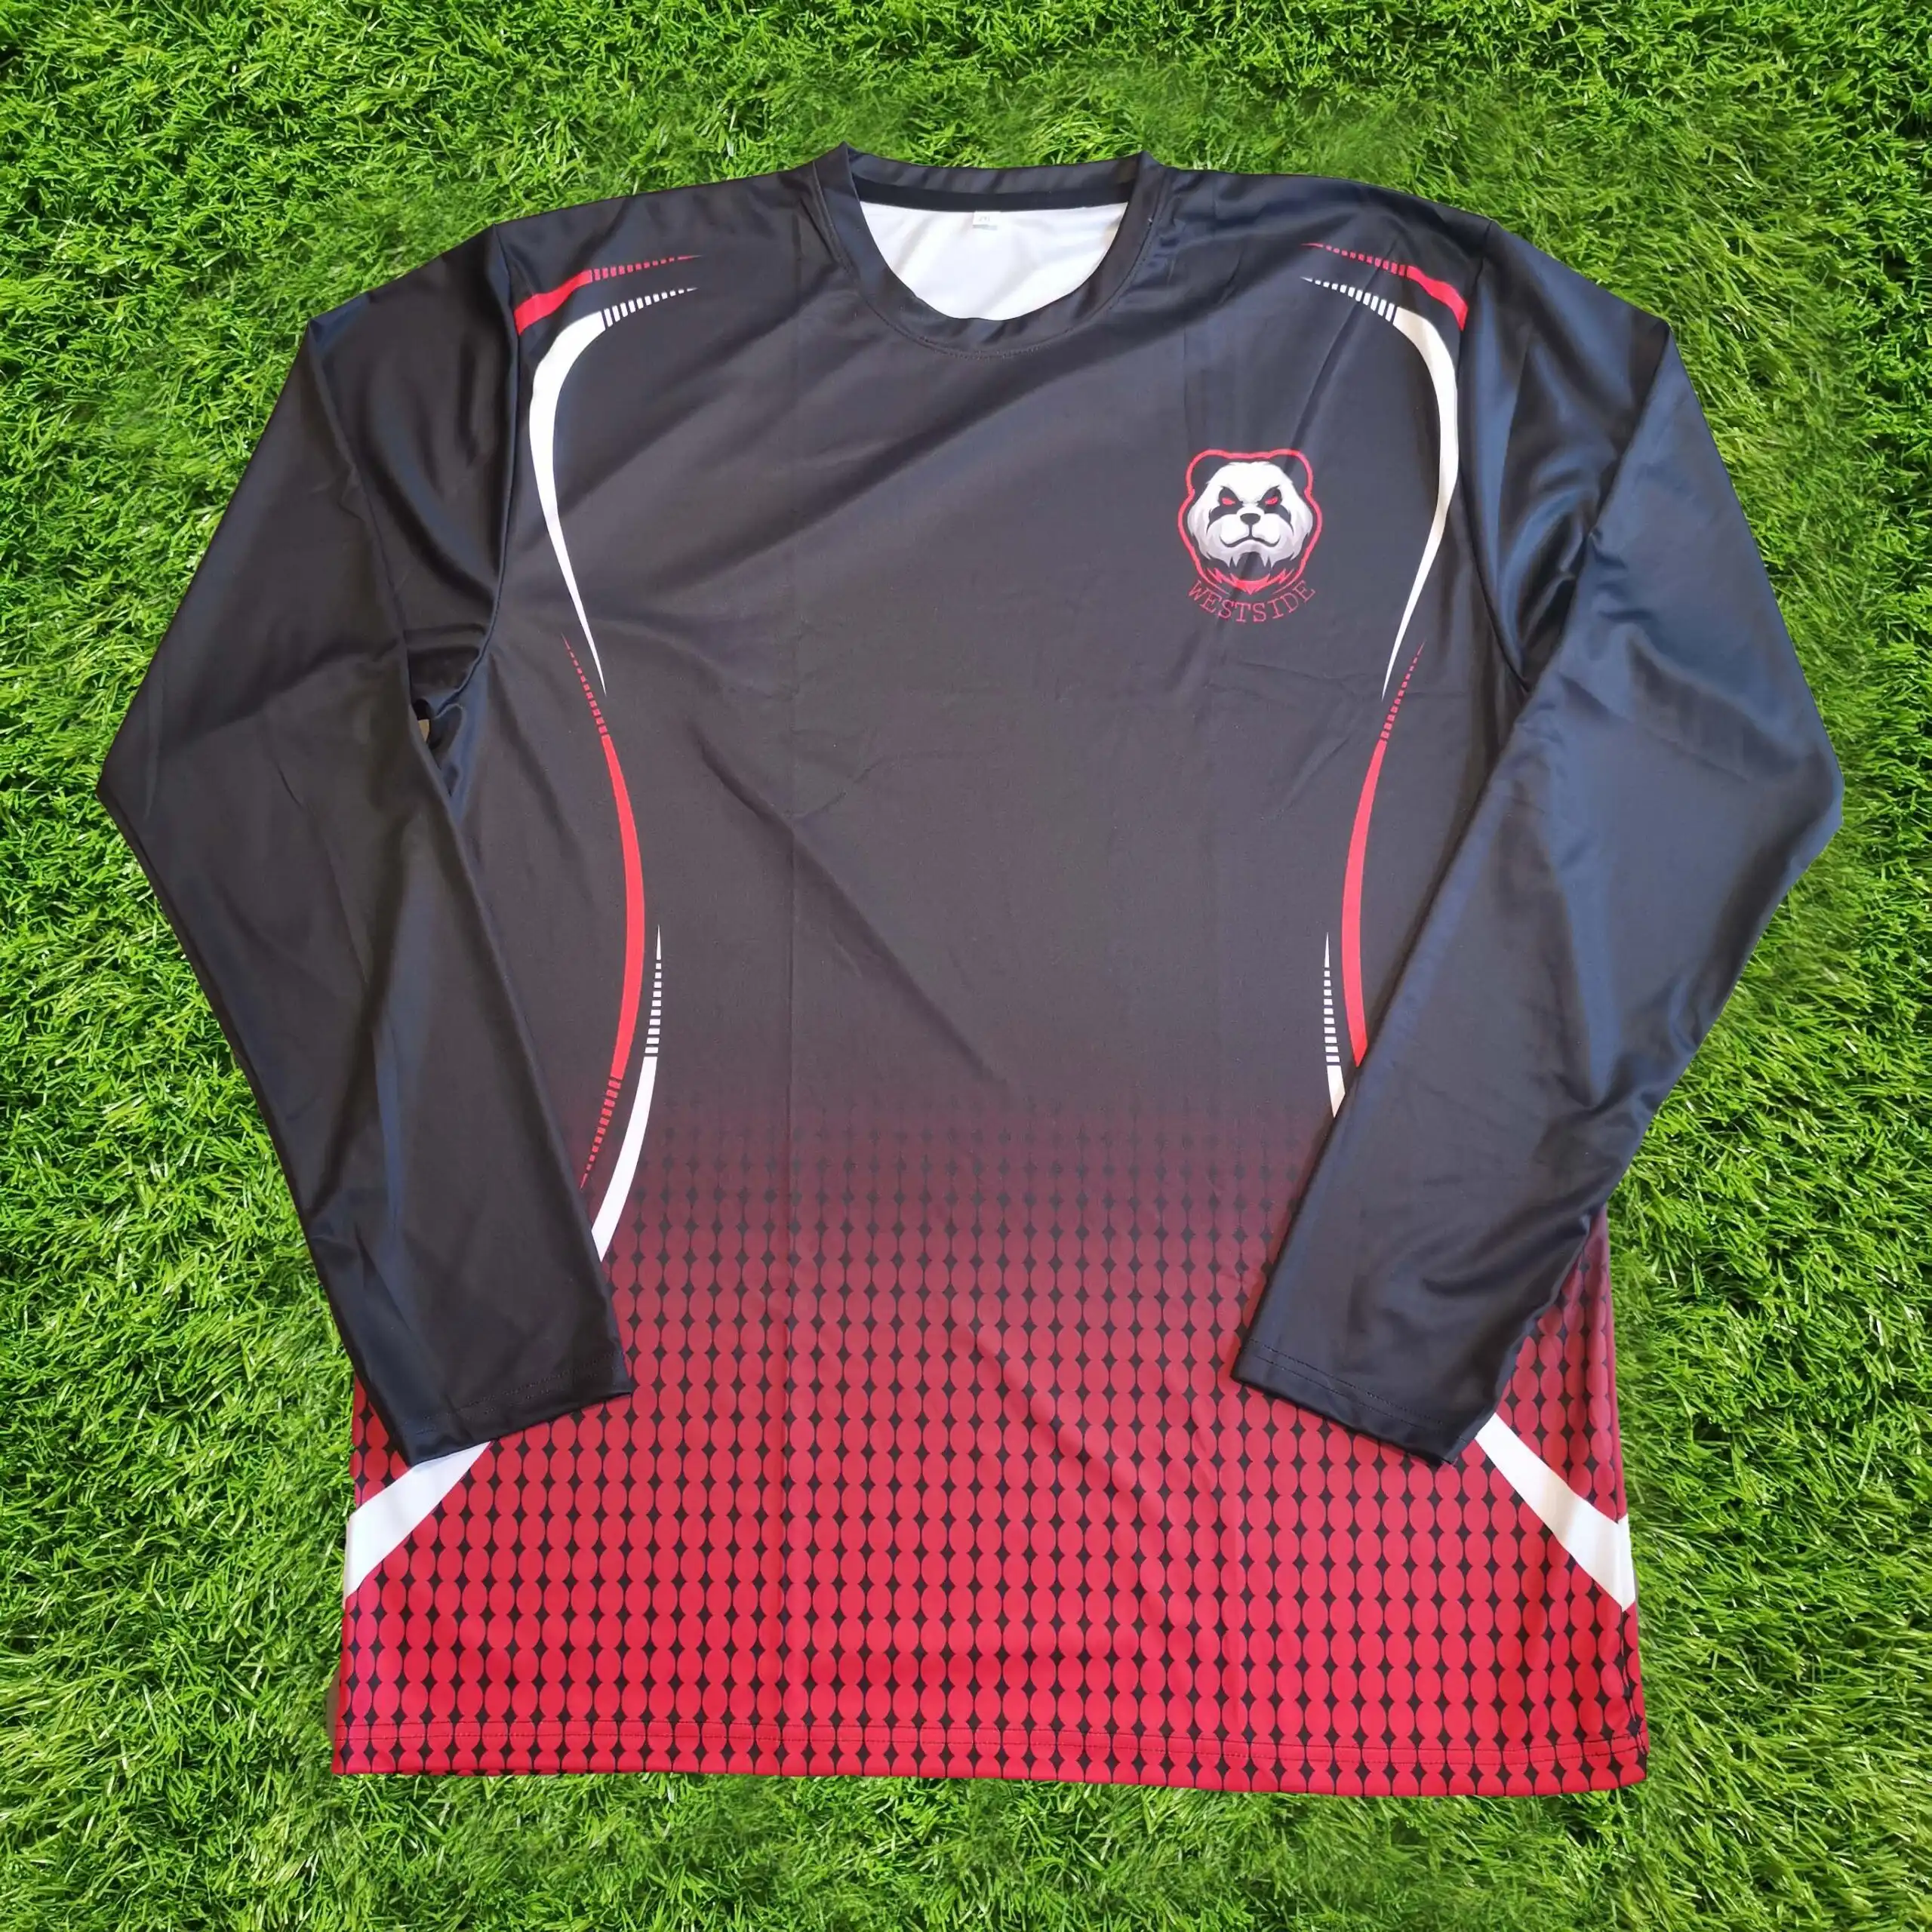 Sublimation Printing in Long Sleeve